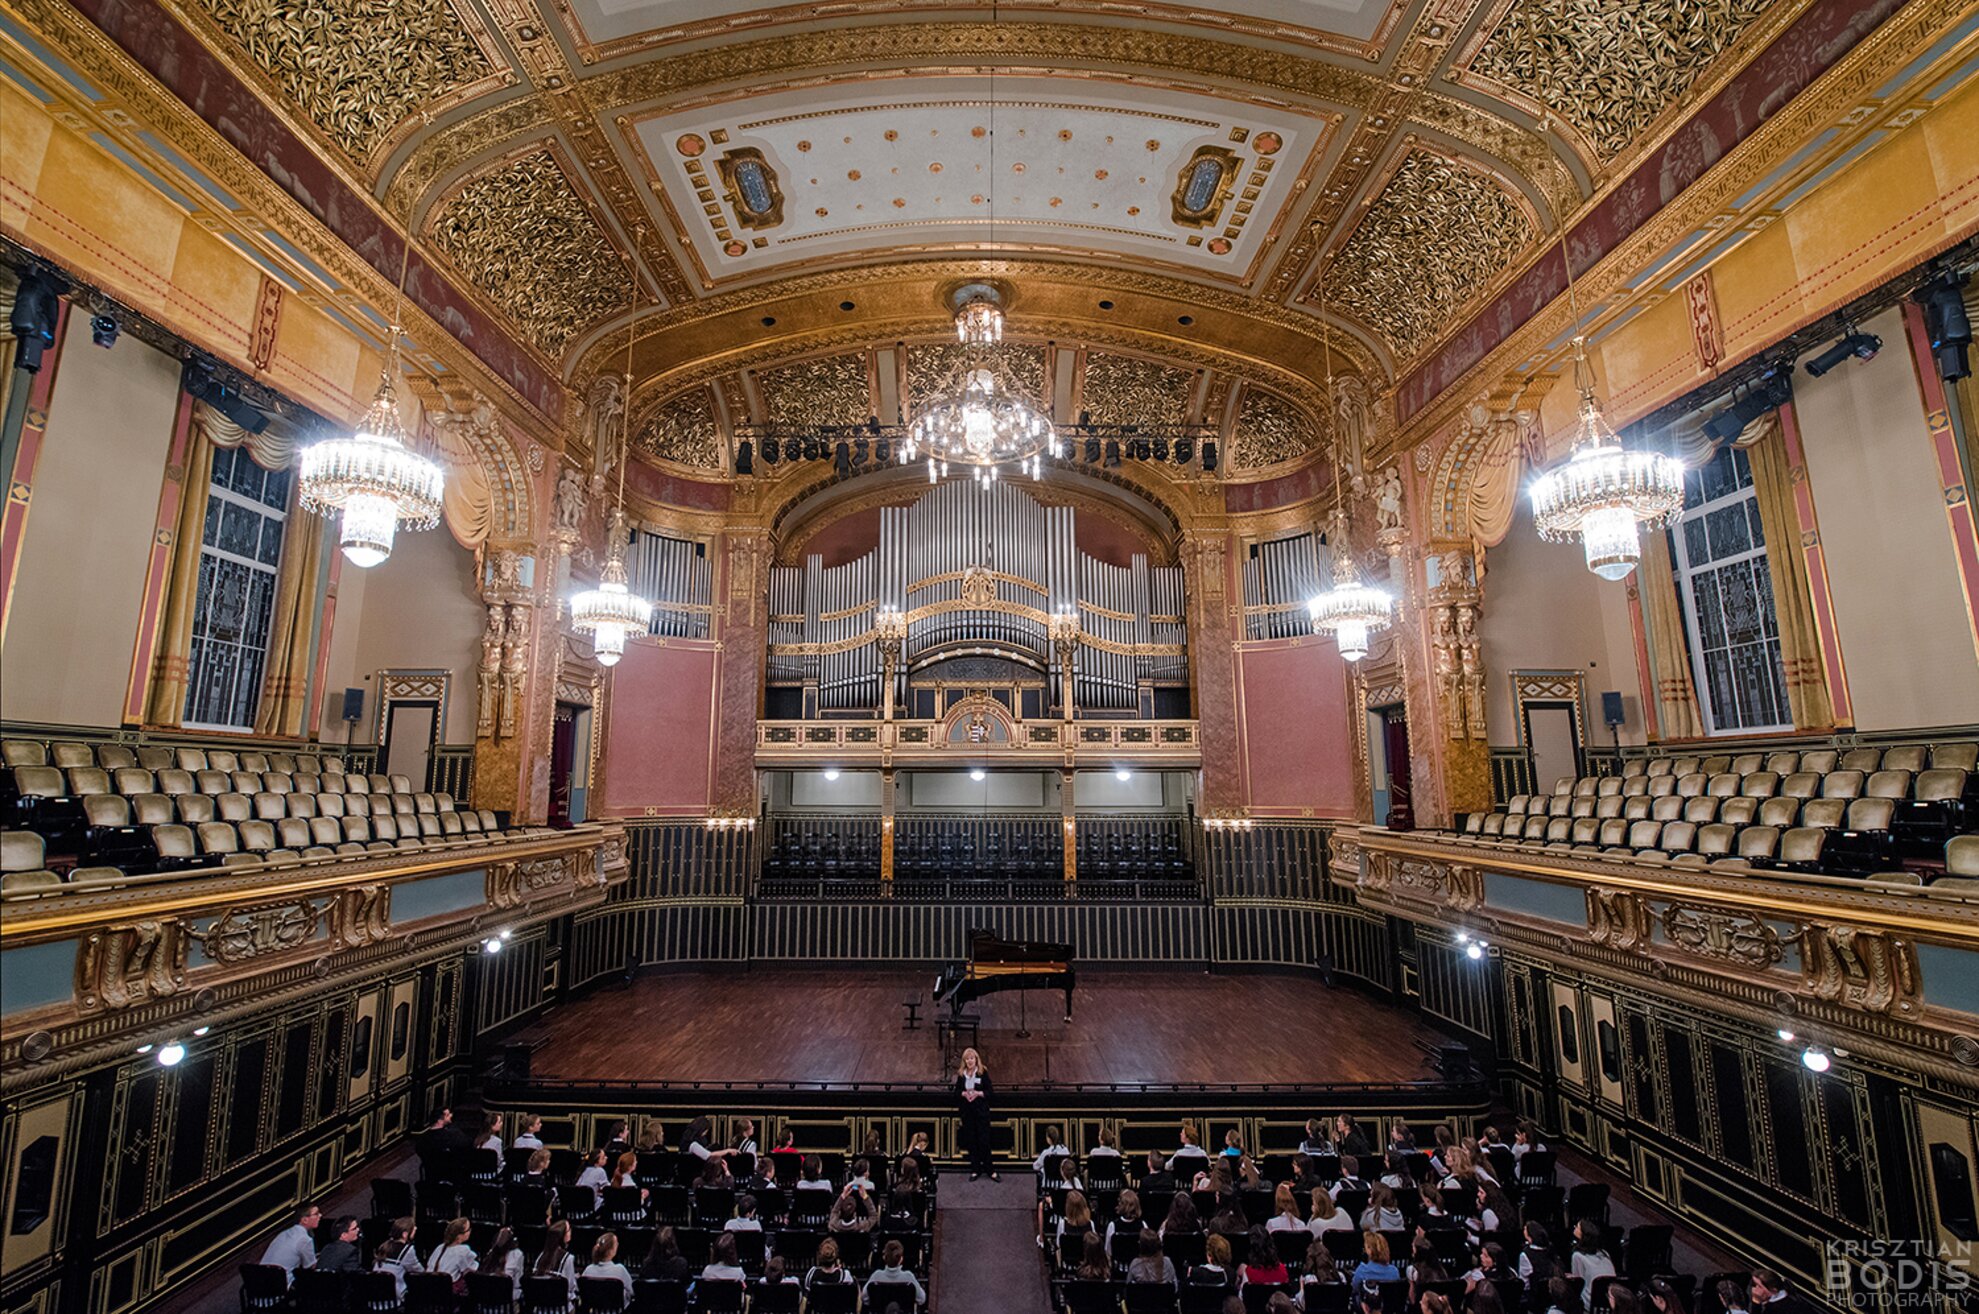 Guided Tour & Mini Concert at the Franz Liszt Music Academy